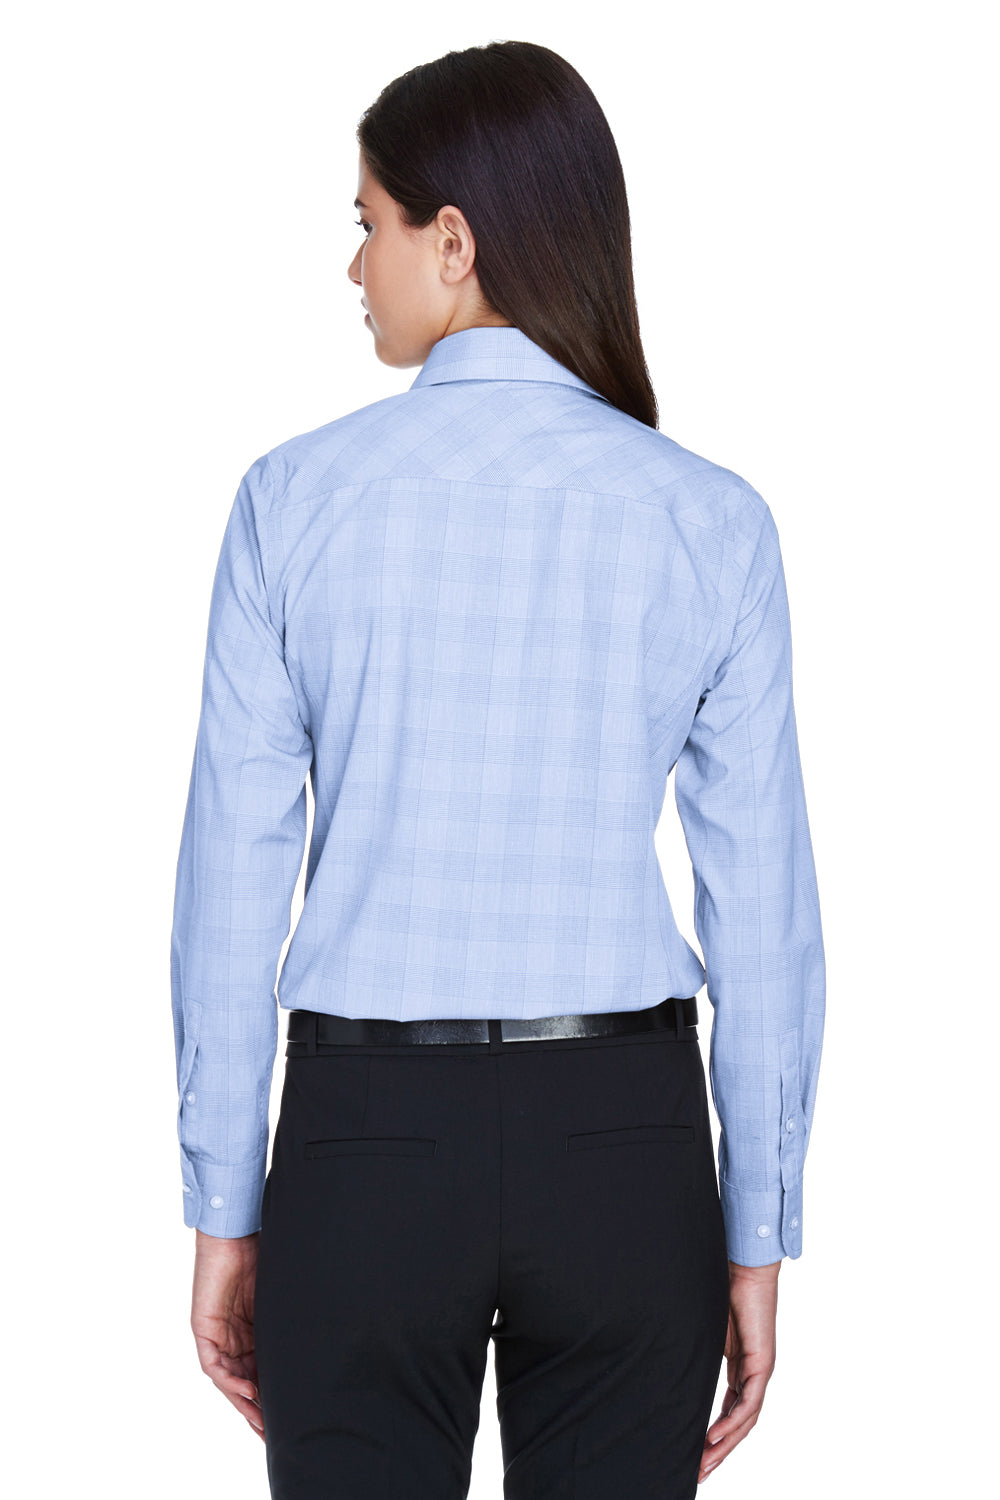 Devon & Jones DG520W Womens Crown Woven Collection Wrinkle Resistant Long Sleeve Button Down Shirt White/Light French Blue Back